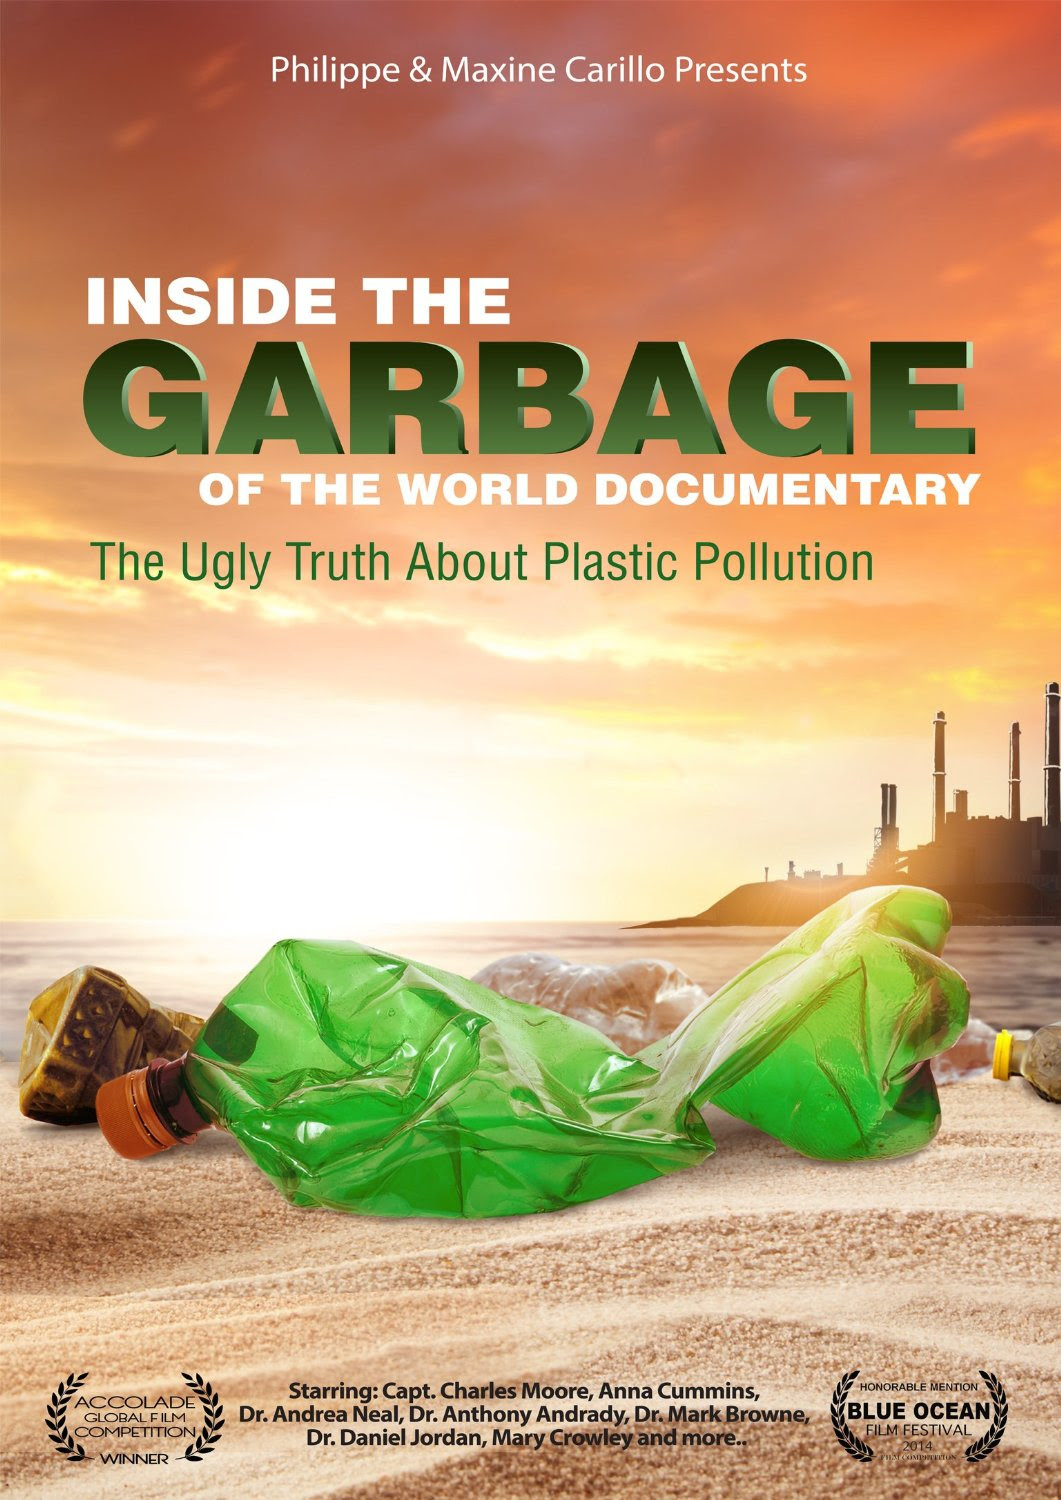 Inside The Garbage Of The World Documentary. What I found interesting and my thoughts on the film.